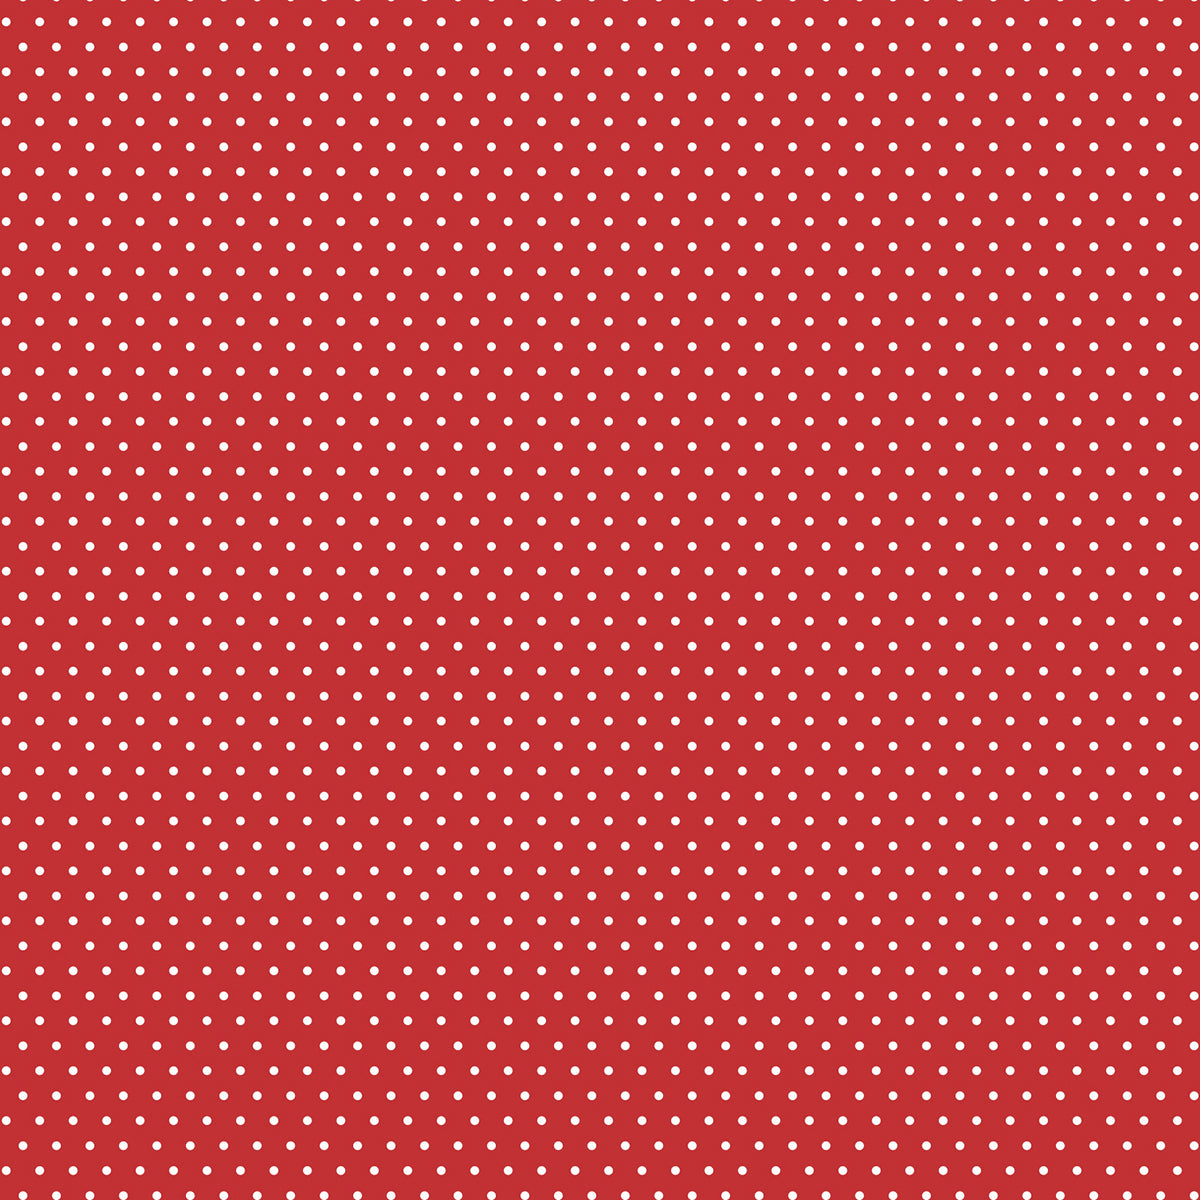 Cherry Red Printed Cardstock 12x12 Solid Paper